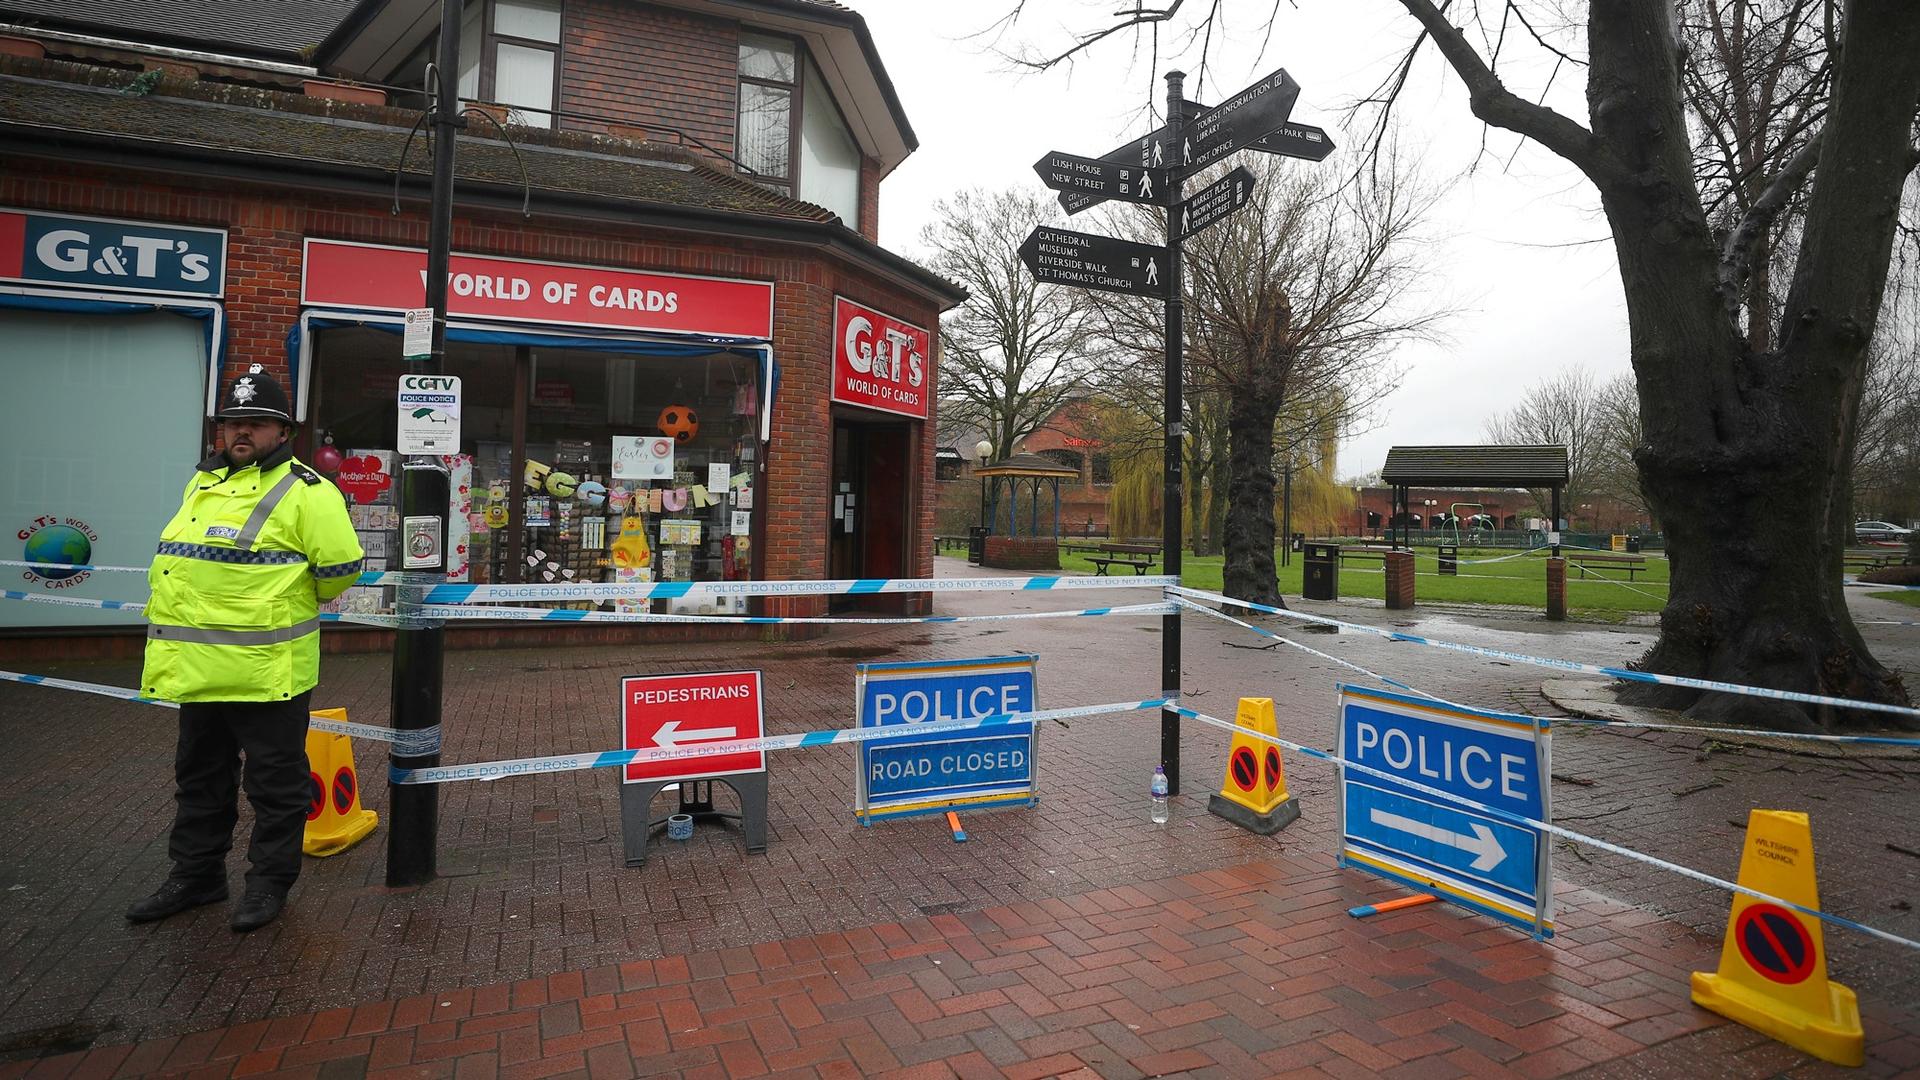 A police officer is shown standing to the left of the photograph, wearing a fluorescent jacket guards a cordoned off area where former Russian intelligence officer Sergei Skripal and his daughter Yulia were found poisoned.